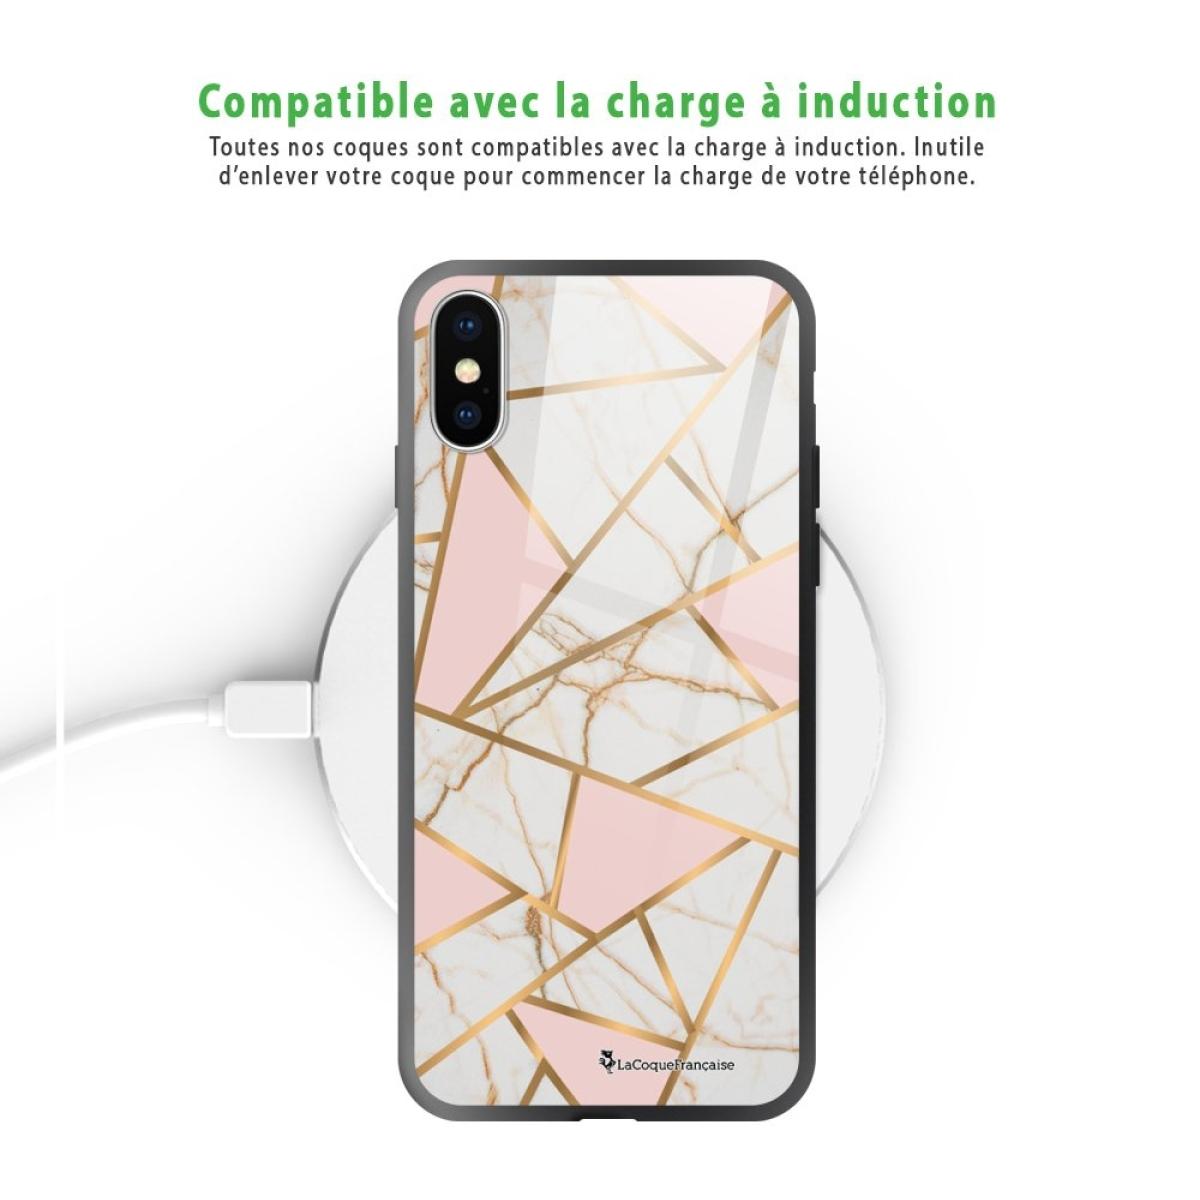 Coque iPhone X/Xs Coque Soft Touch Glossy Marbre Rose Design La Coque Francaise